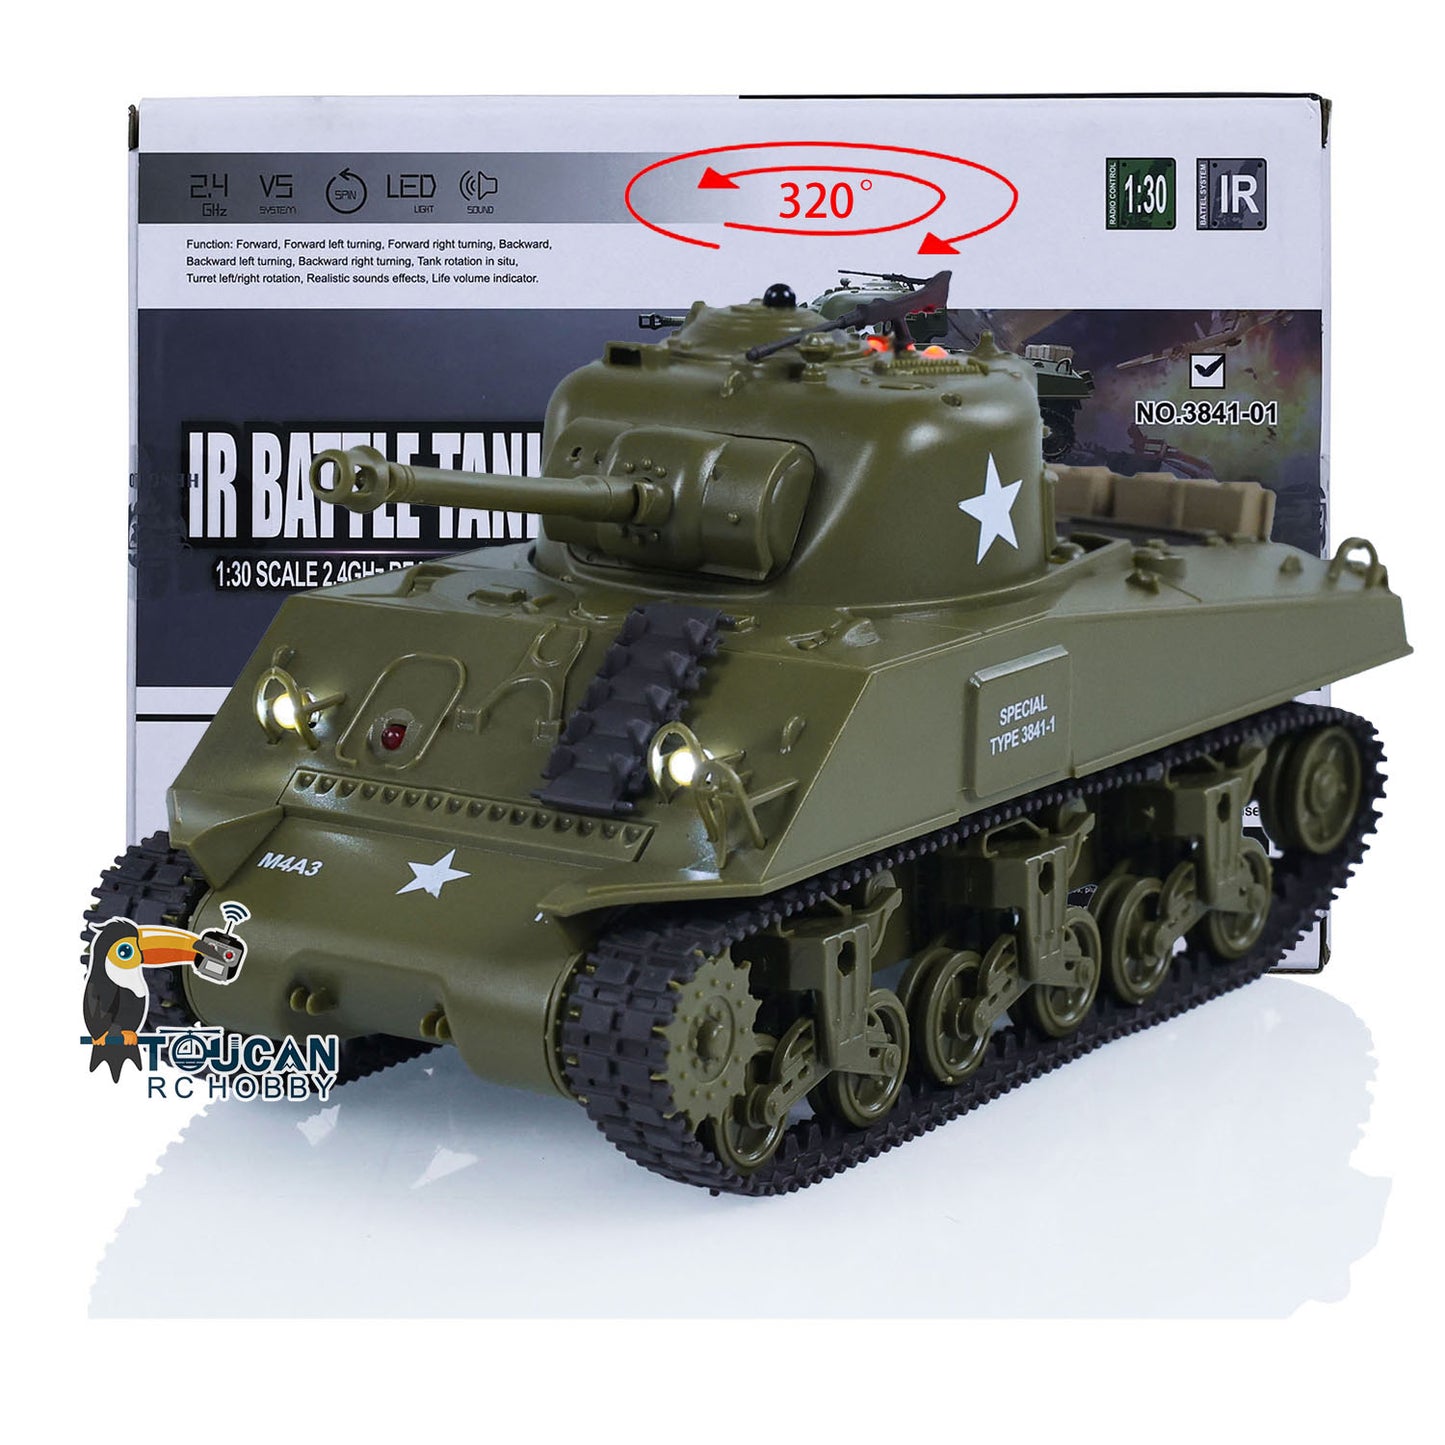 1/30 Heng Long Plastic RC Battle Tank Sherman M4A3 3841-01 2.4G Remote Control Panzer Military Vehicles Painted Assembled